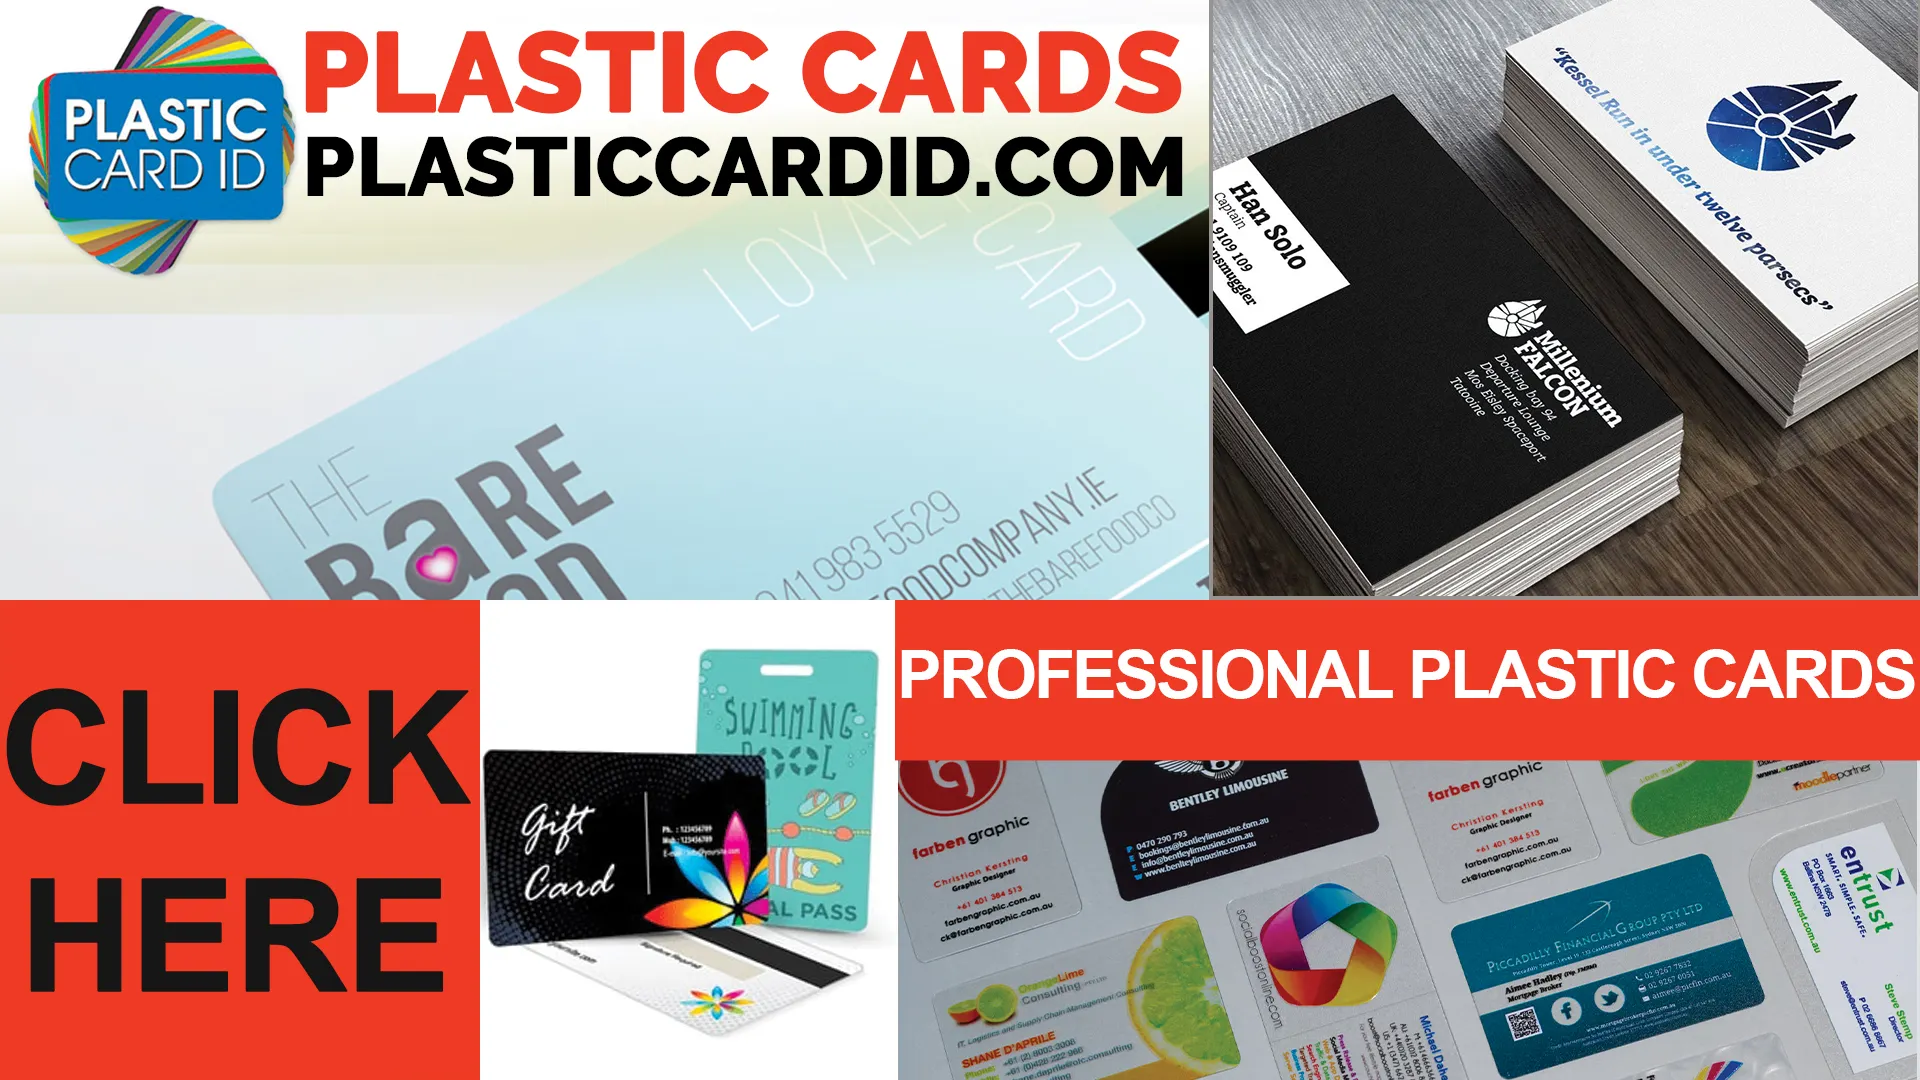 Accessorize Your Plastic Cards